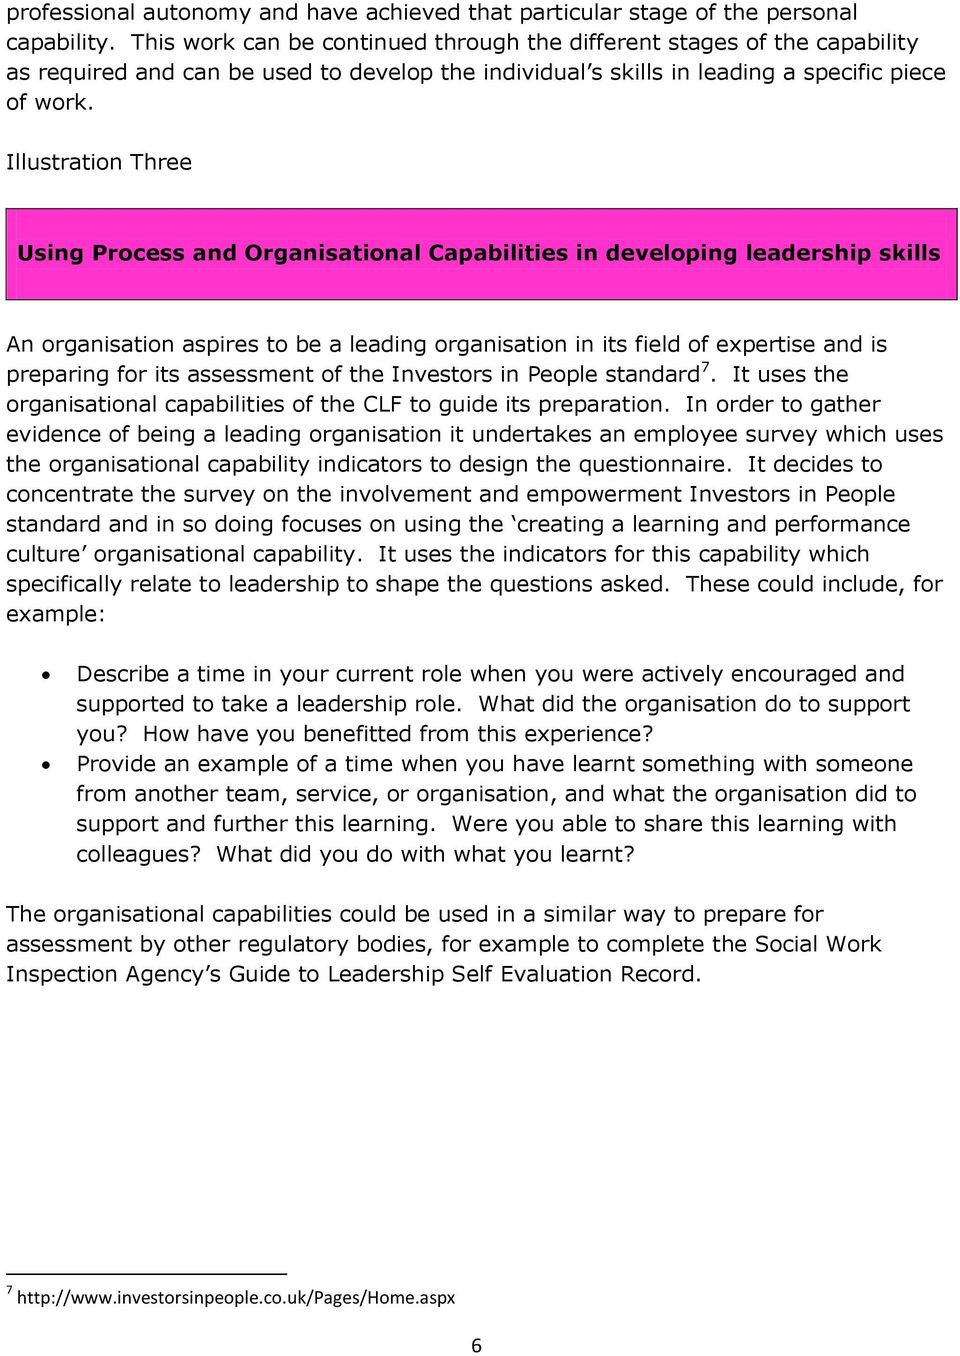 Illustration Three Using Process and Organisational Capabilities in developing leadership skills An organisation aspires to be a leading organisation in its field of expertise and is preparing for